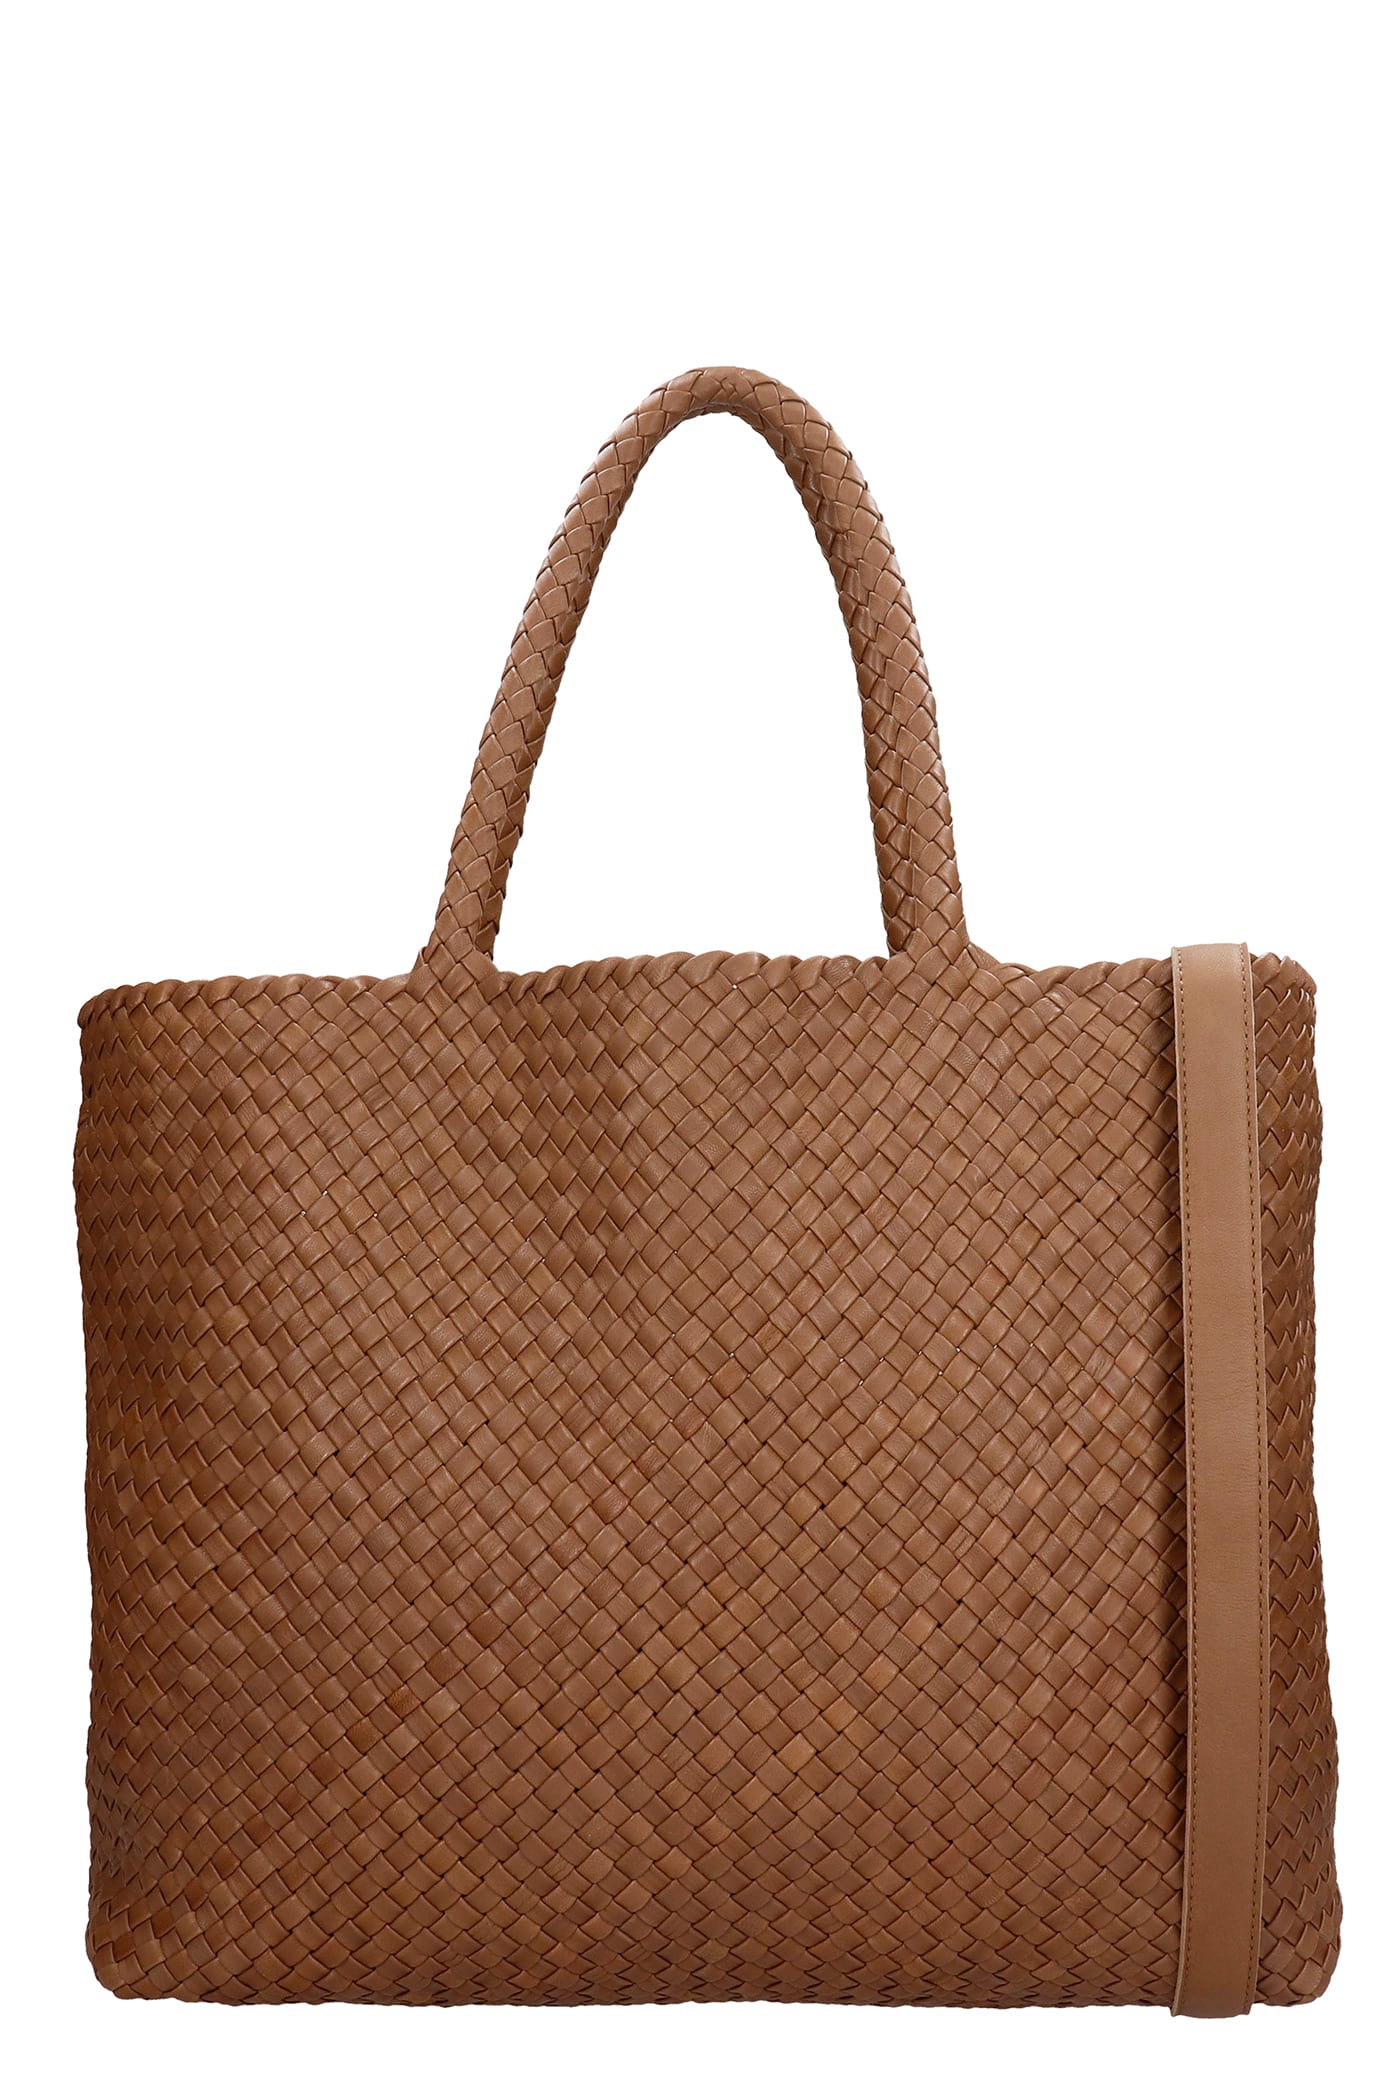 Officine Creative OC CLASS 35 TOTE IN BROWN LEATHER